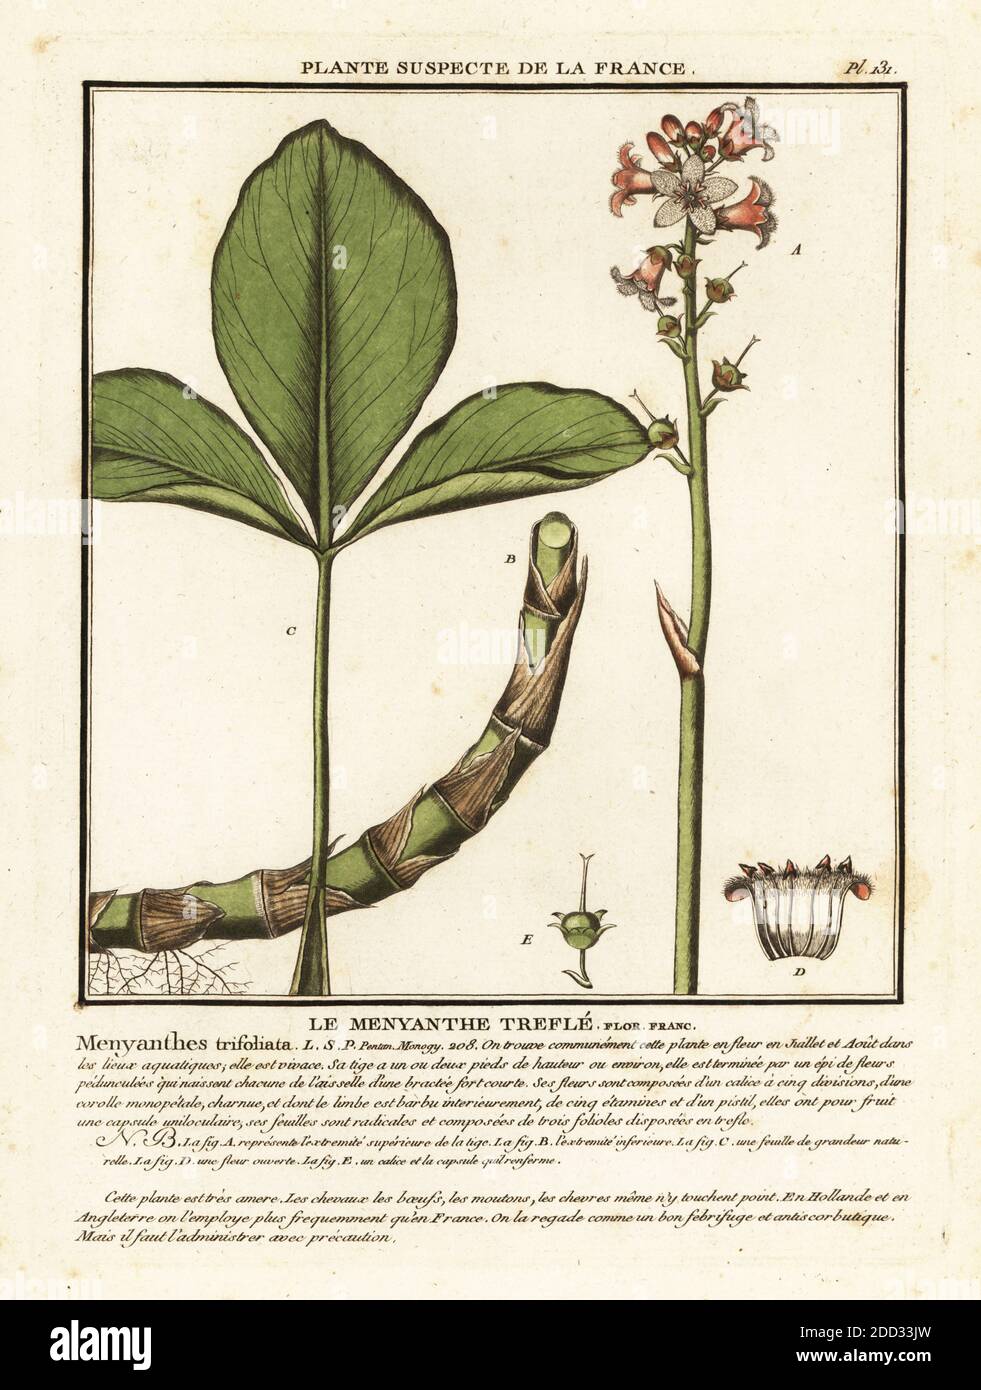 Buckbean or bogbean, Le menyanthe trefle, Menyanthes trifoliata.  Copperplate engraving printed in three colours by Pierre Bulliard from his Herbier de la France, ou collection complete des plantes indigenes de ce royaume, Didot jeune, Debure et Belin, 1780-1793. Stock Photo